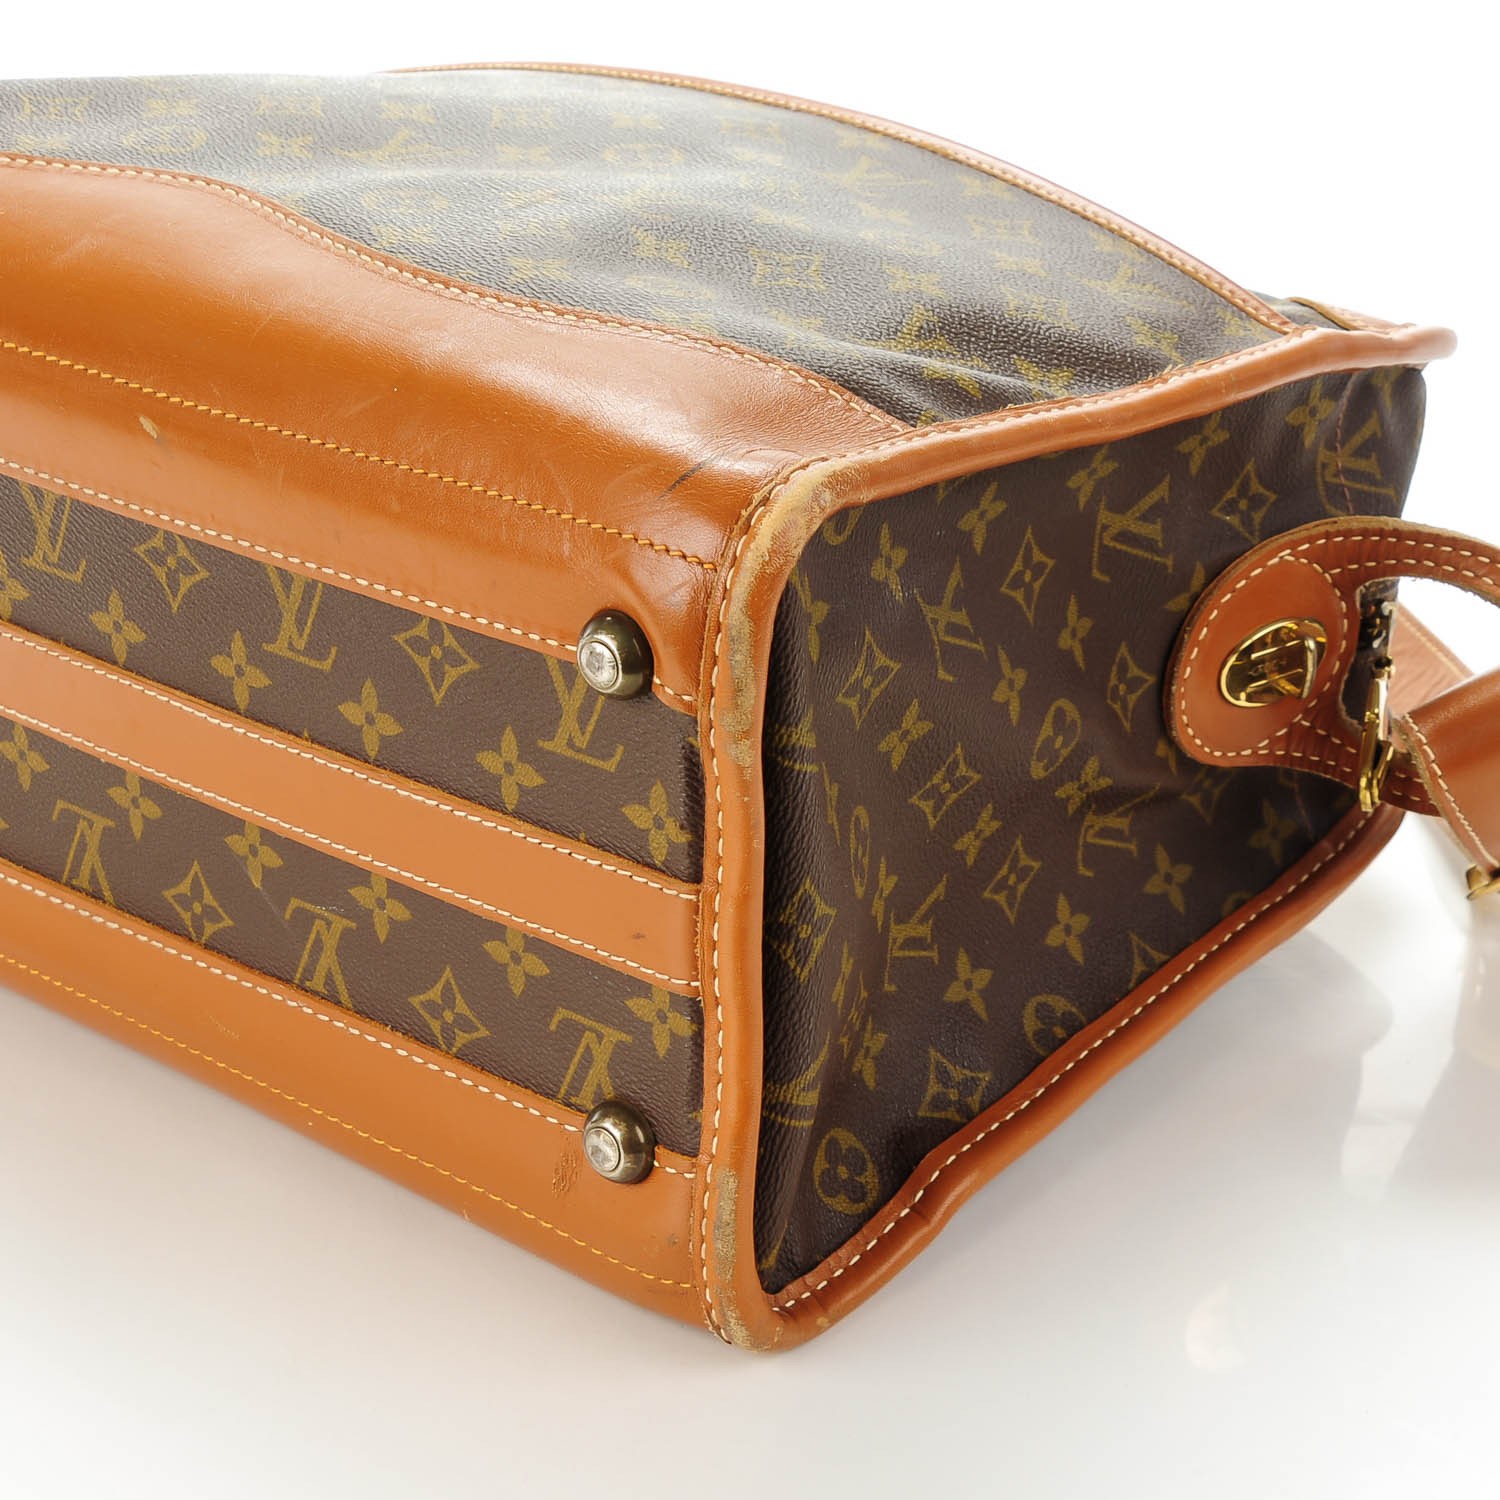 LOUIS VUITTON French Company Weekend Bag 135178